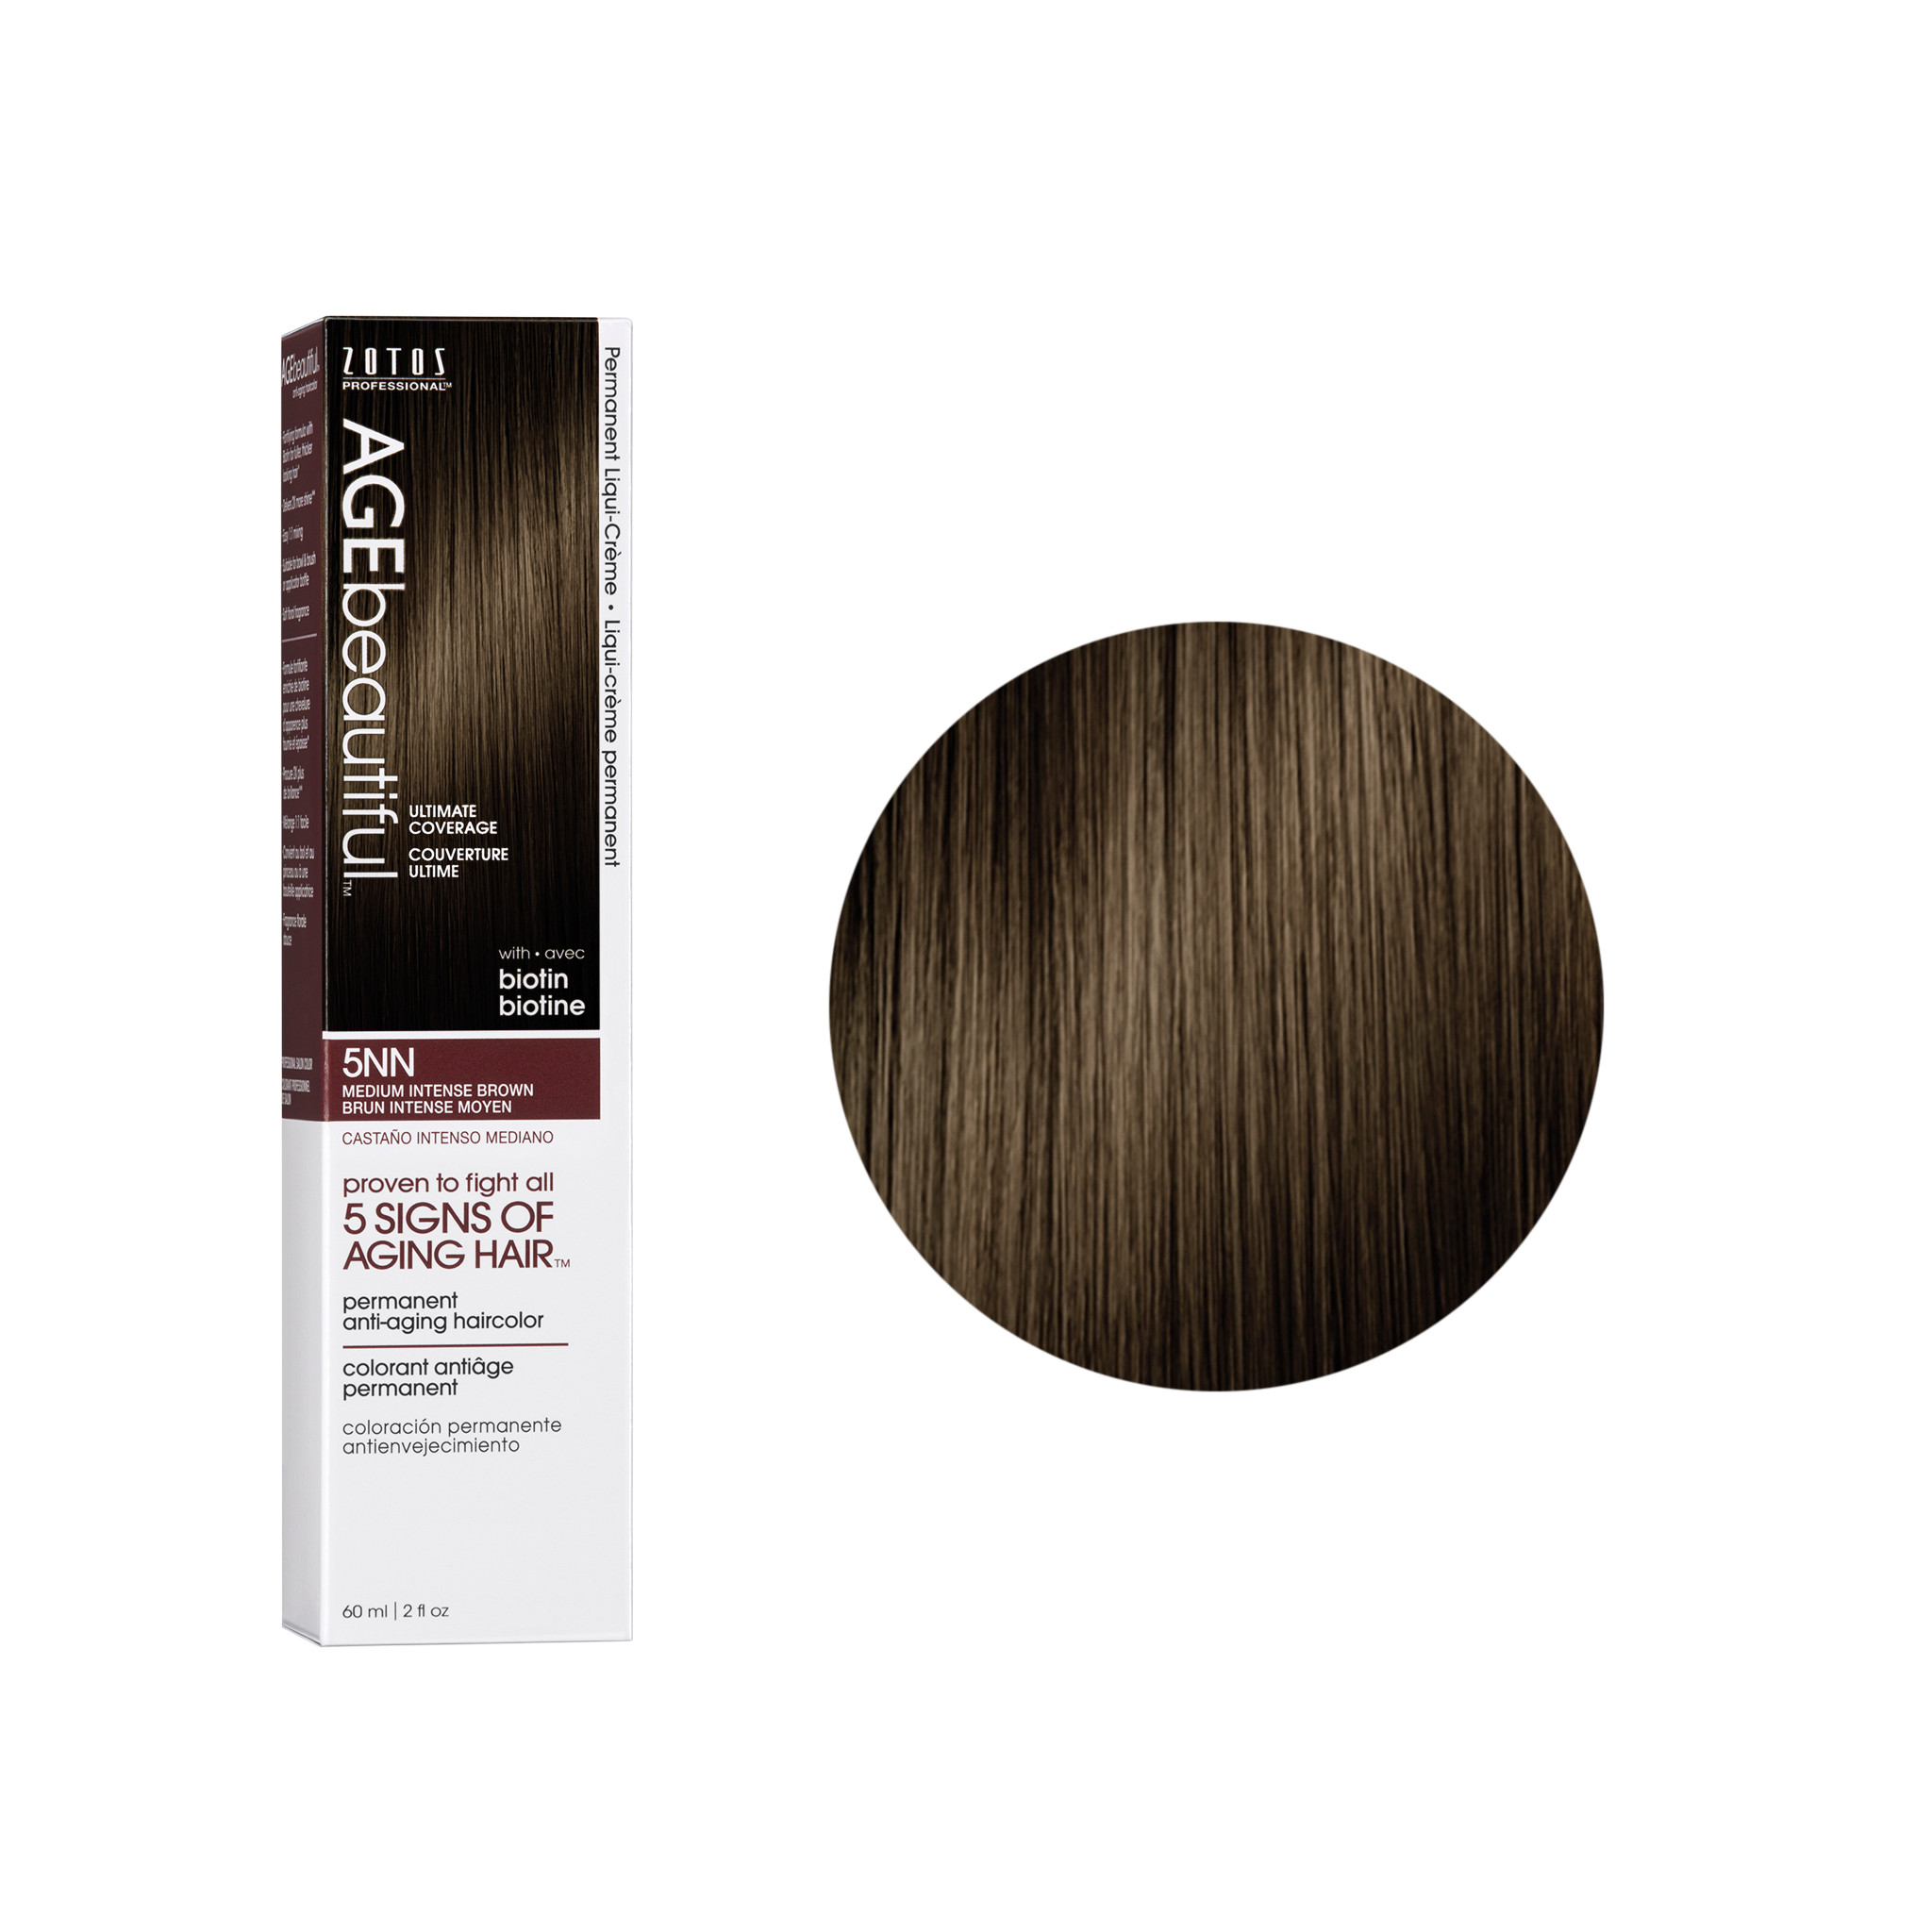 Age Beautiful is the first professional  hair colour solution to combat aging hair. Anti-aging hair colour with 100% grey coverage. Age Beautiful has been formulated using selected key ingredients proven to fight the 5 signs of aging hair. 